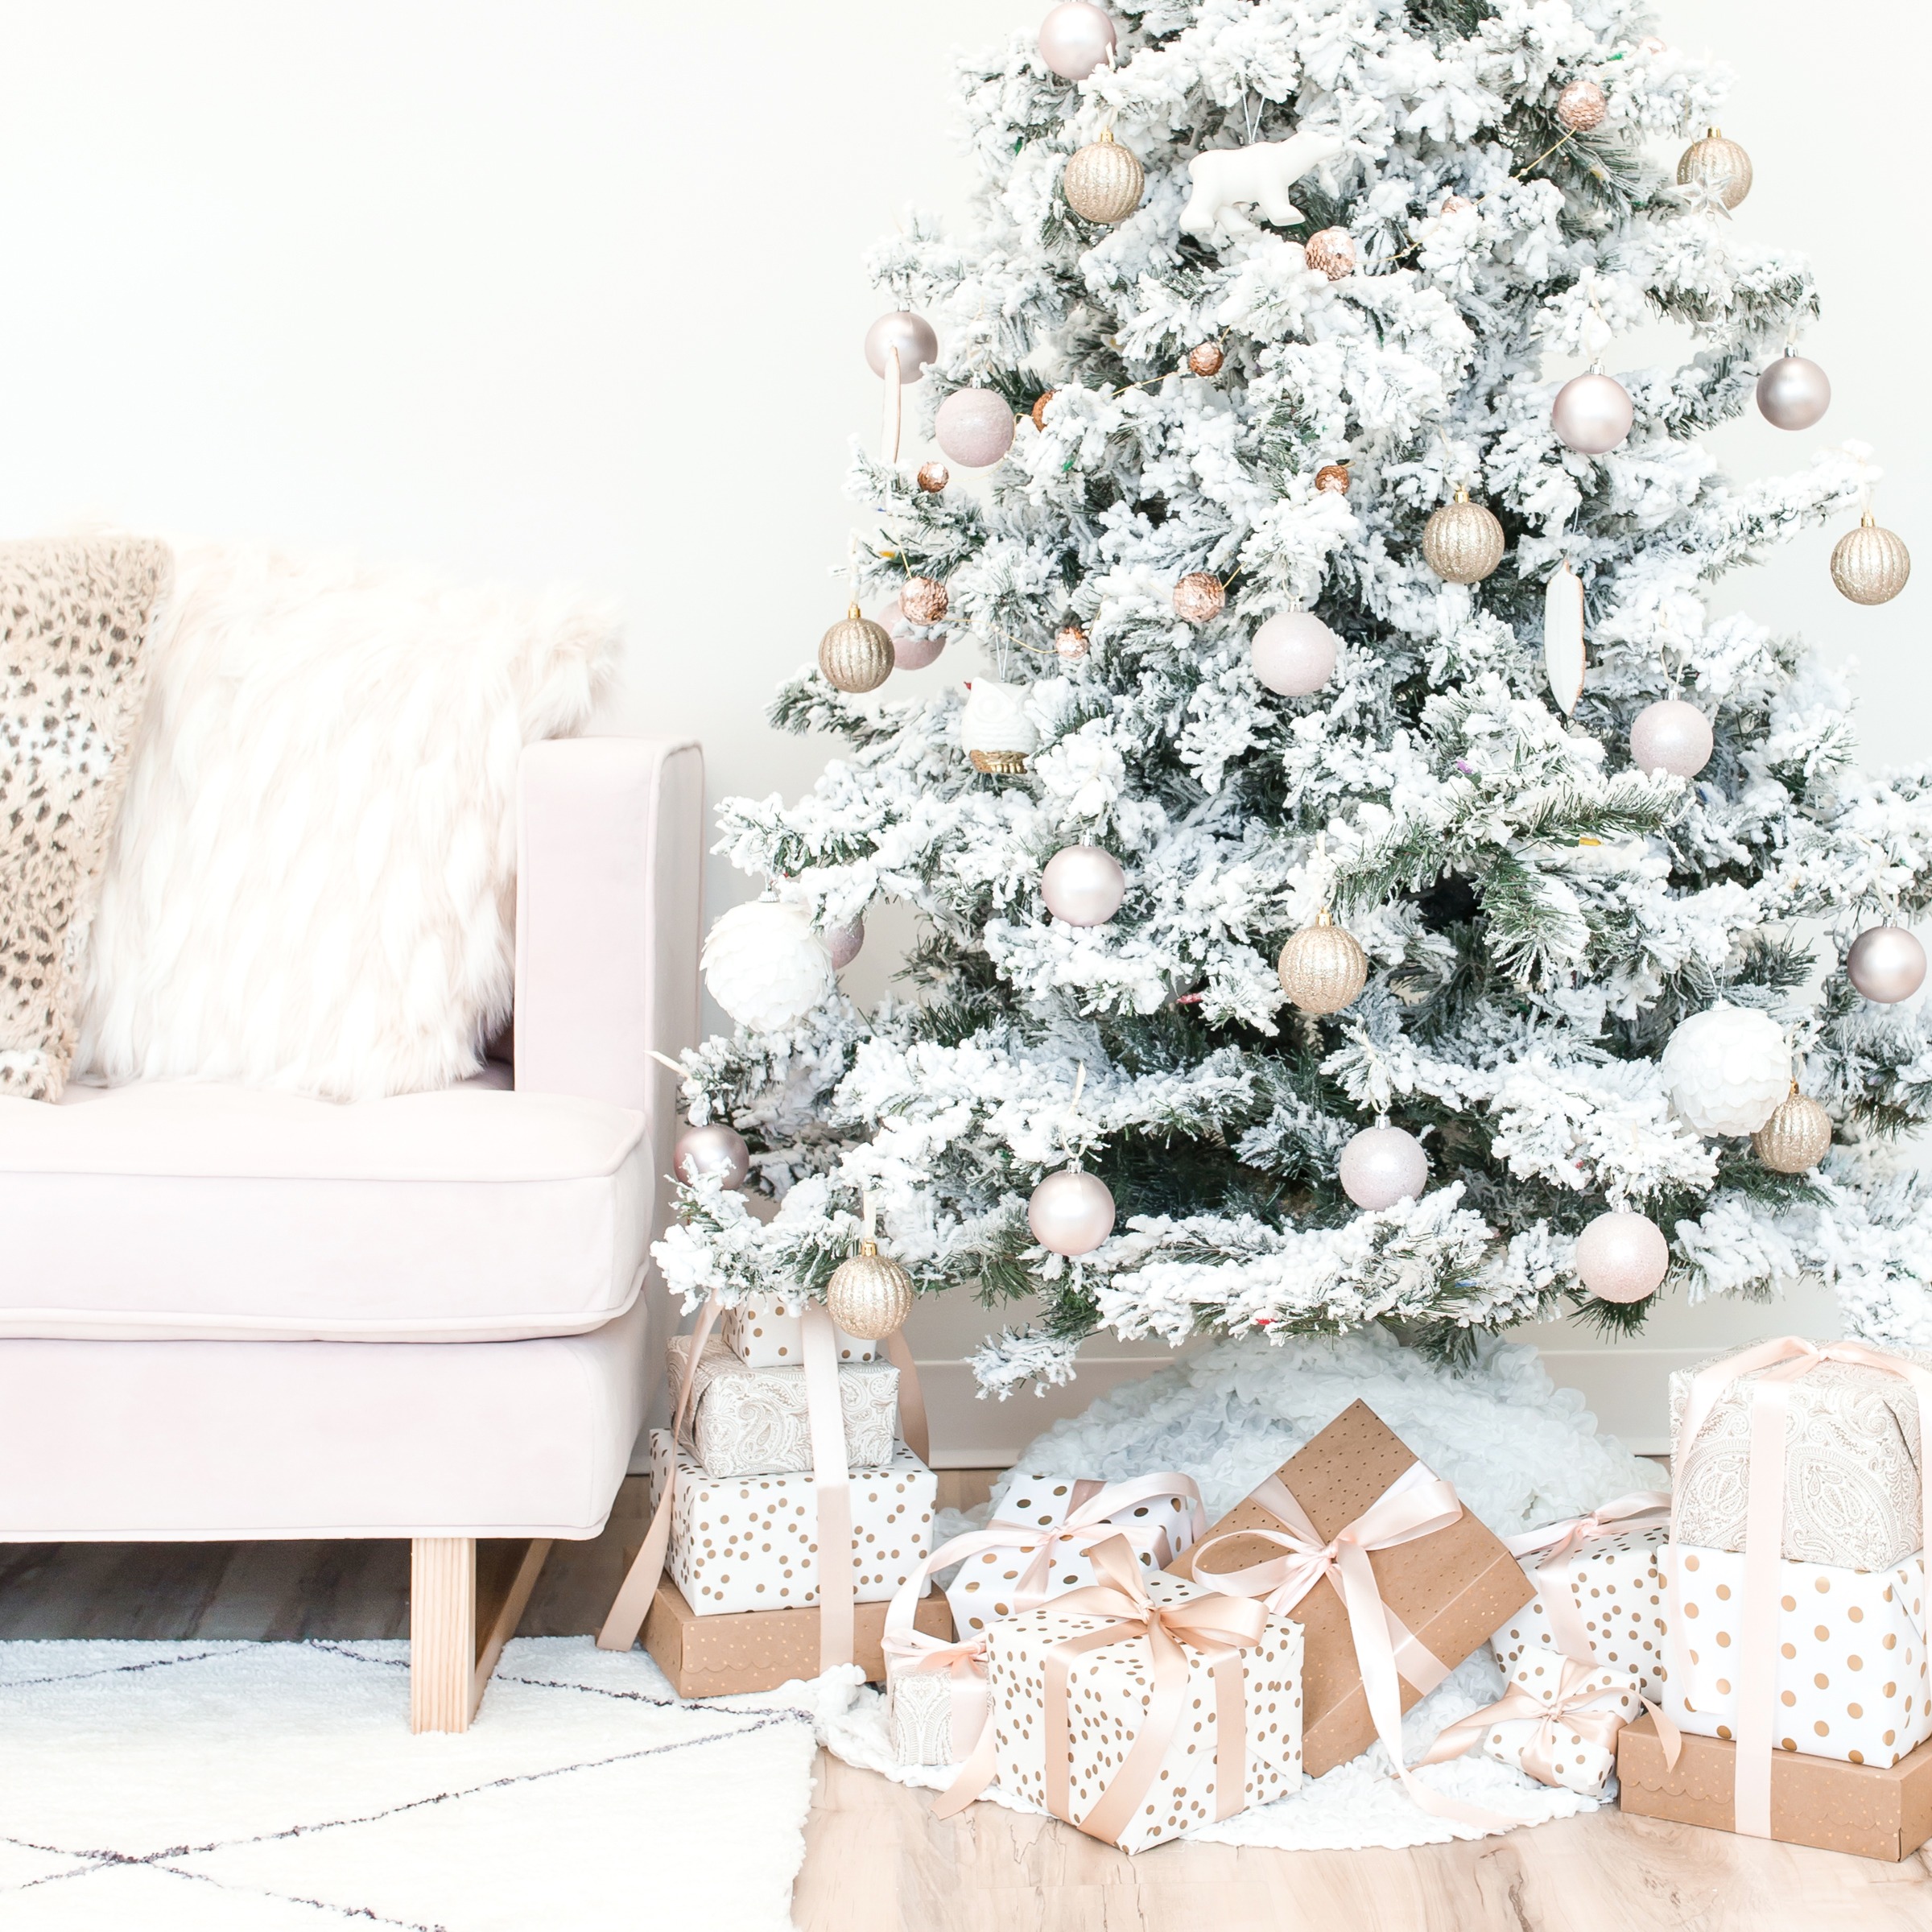 December Is The Best Time To Buy These 5 Things 22